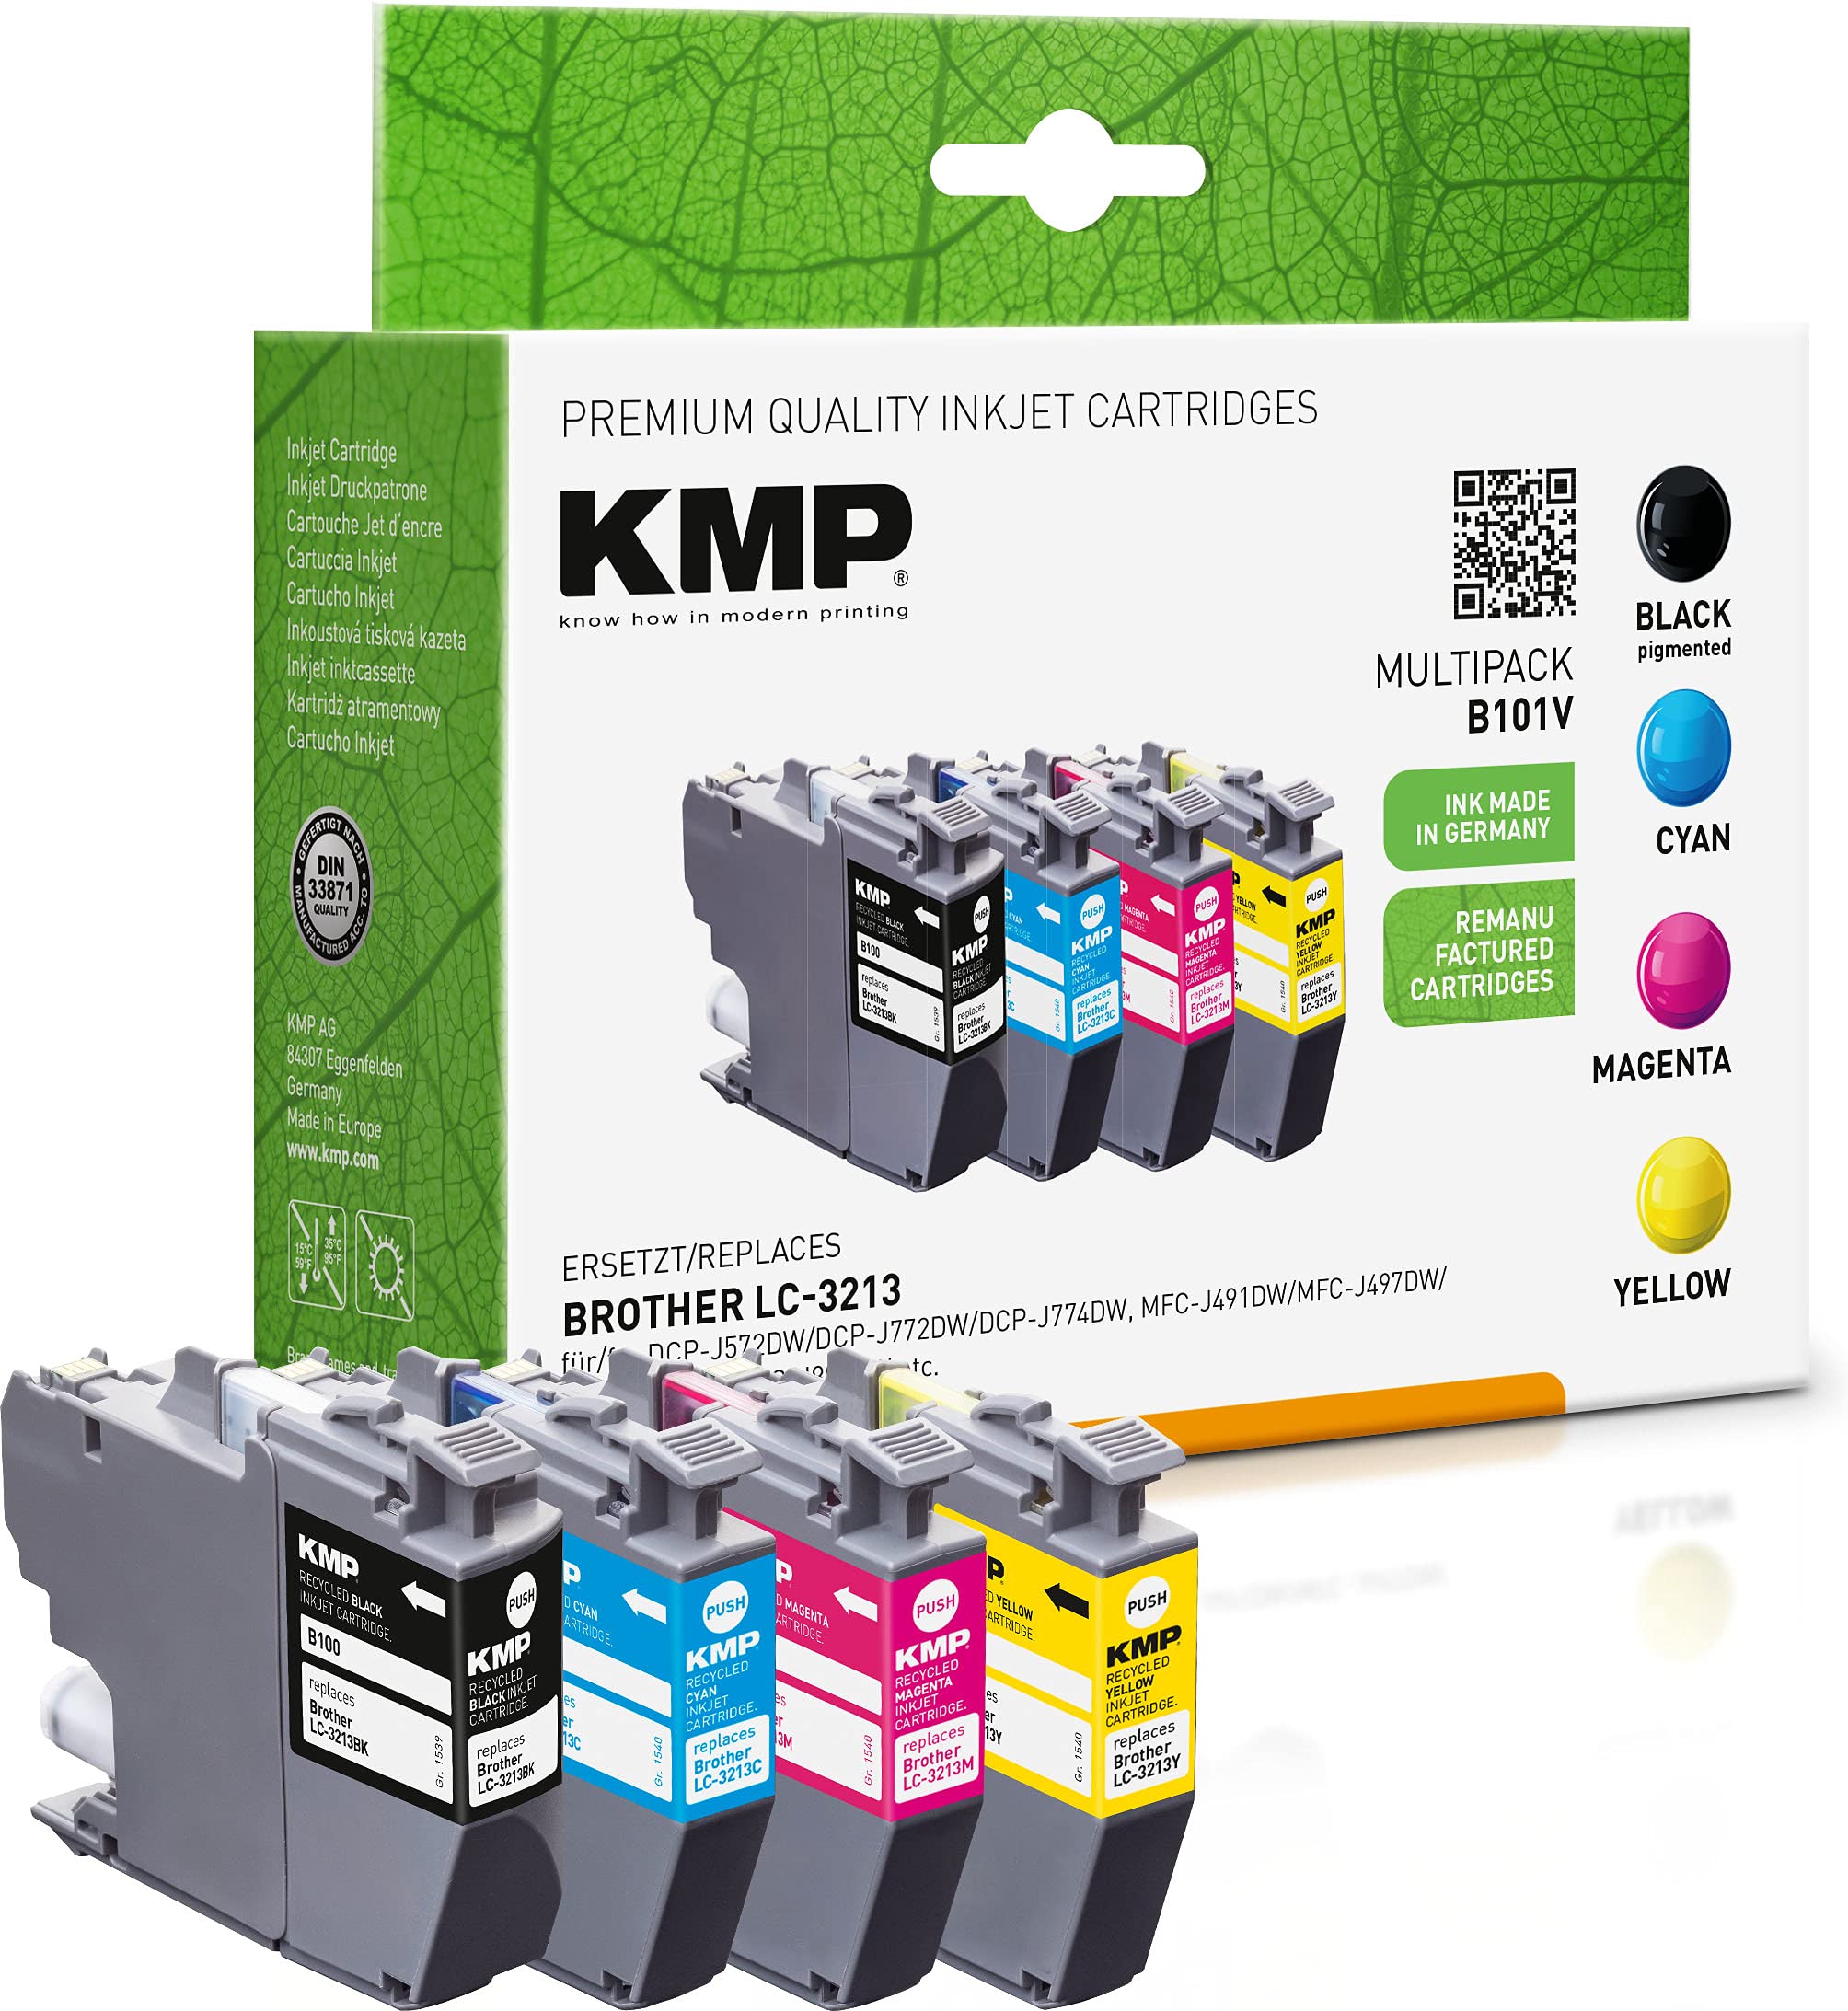 KMP Printer Cartridge Compatible with Brother LC 3213 - Ink Cartridge Multipack Black, Cyan, Magenta, Yellow Set for DCP-J: 572,770, 772,774, MFC-J: 490, 491, 497, 890, 895 DW Series